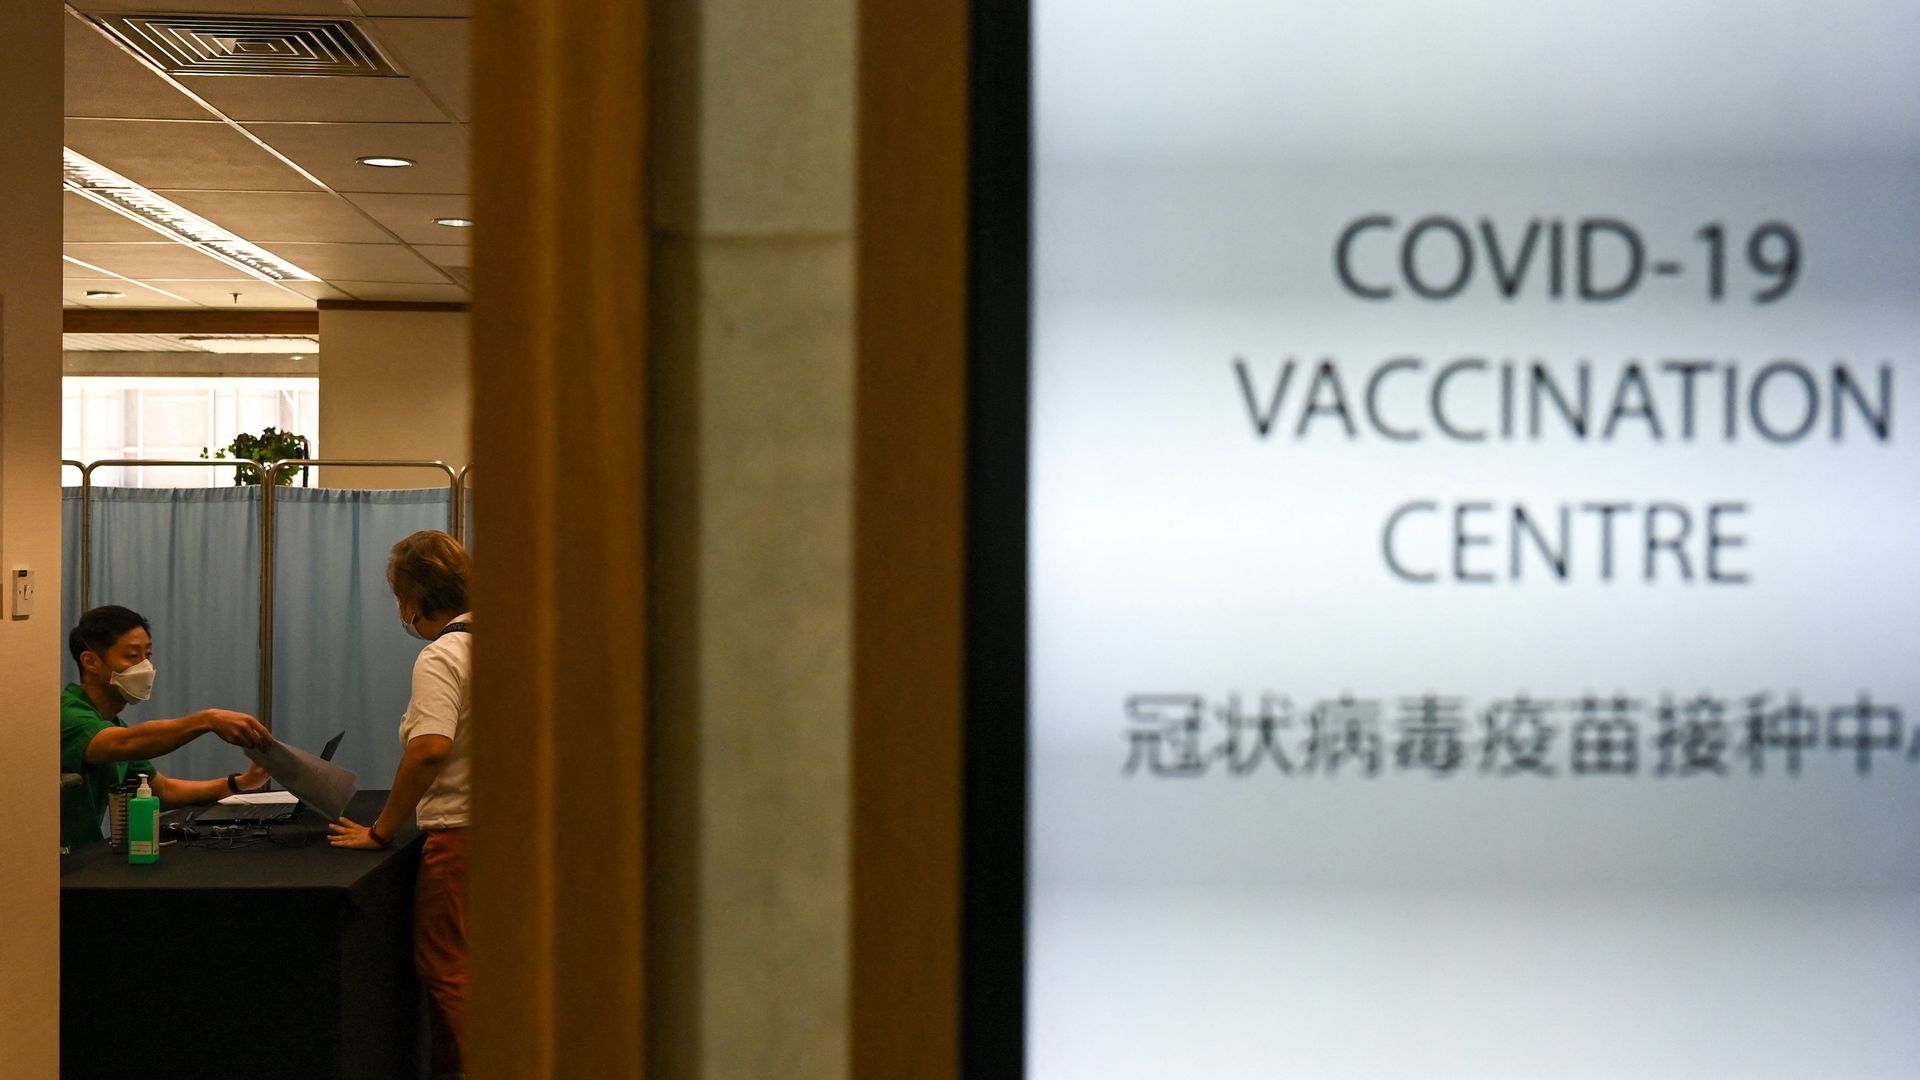 Photo of two people speaking in a room while a sign on the outside says "COVID-19 Vaccination Centre" in English and Chinese